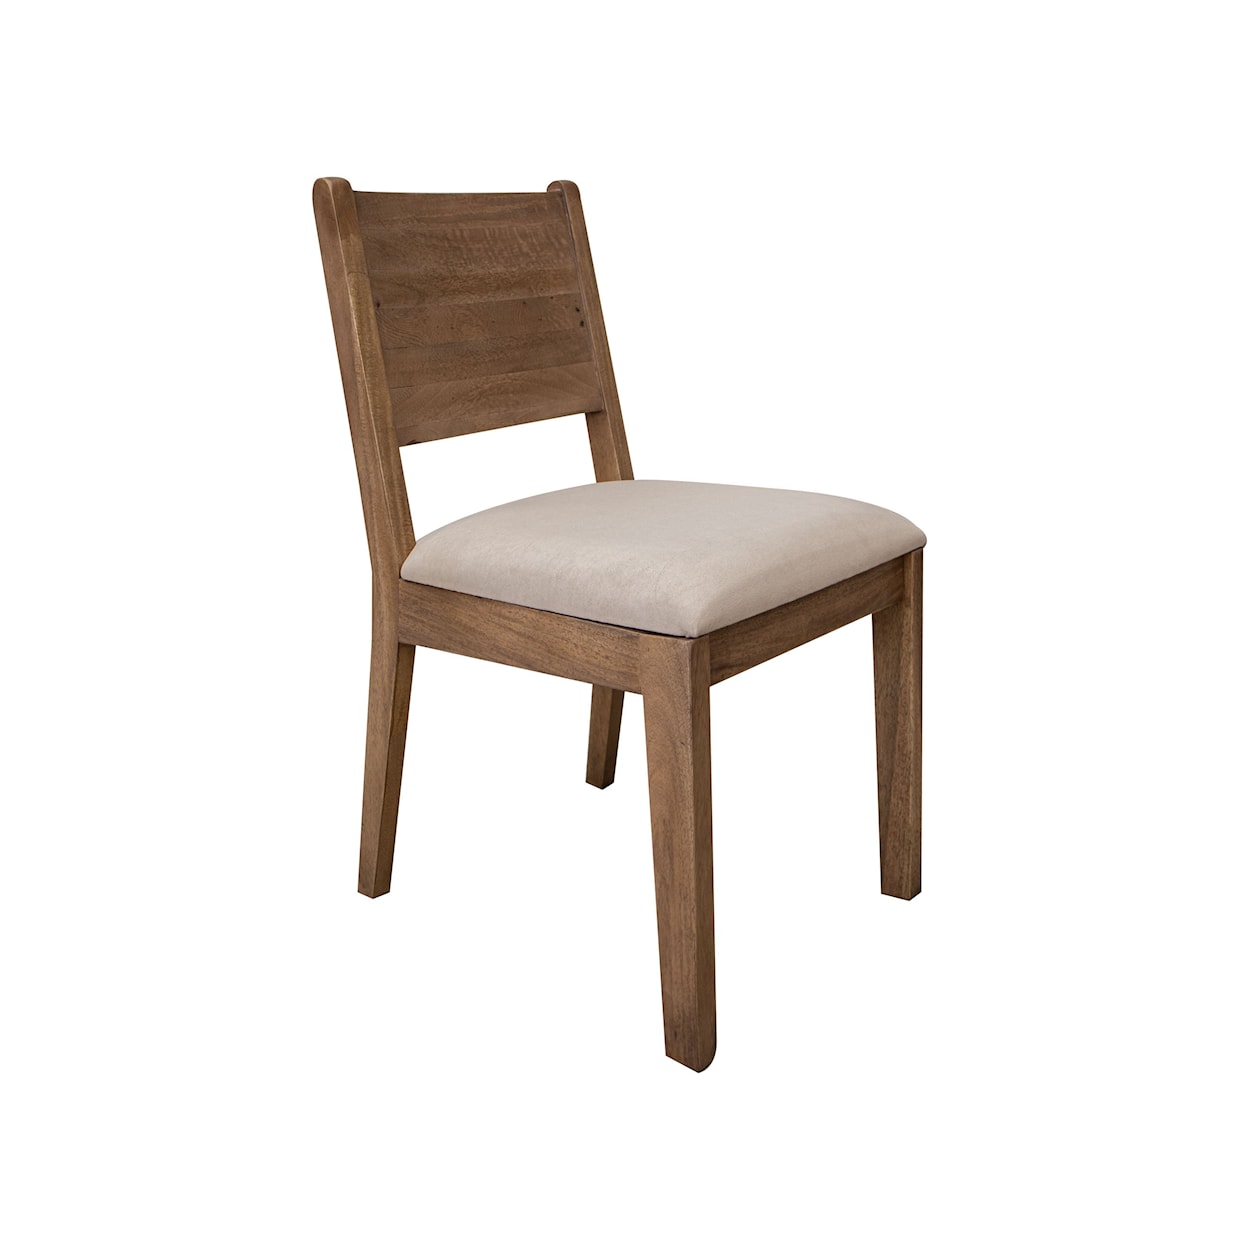 International Furniture Direct Mezquite Dining Side Chair